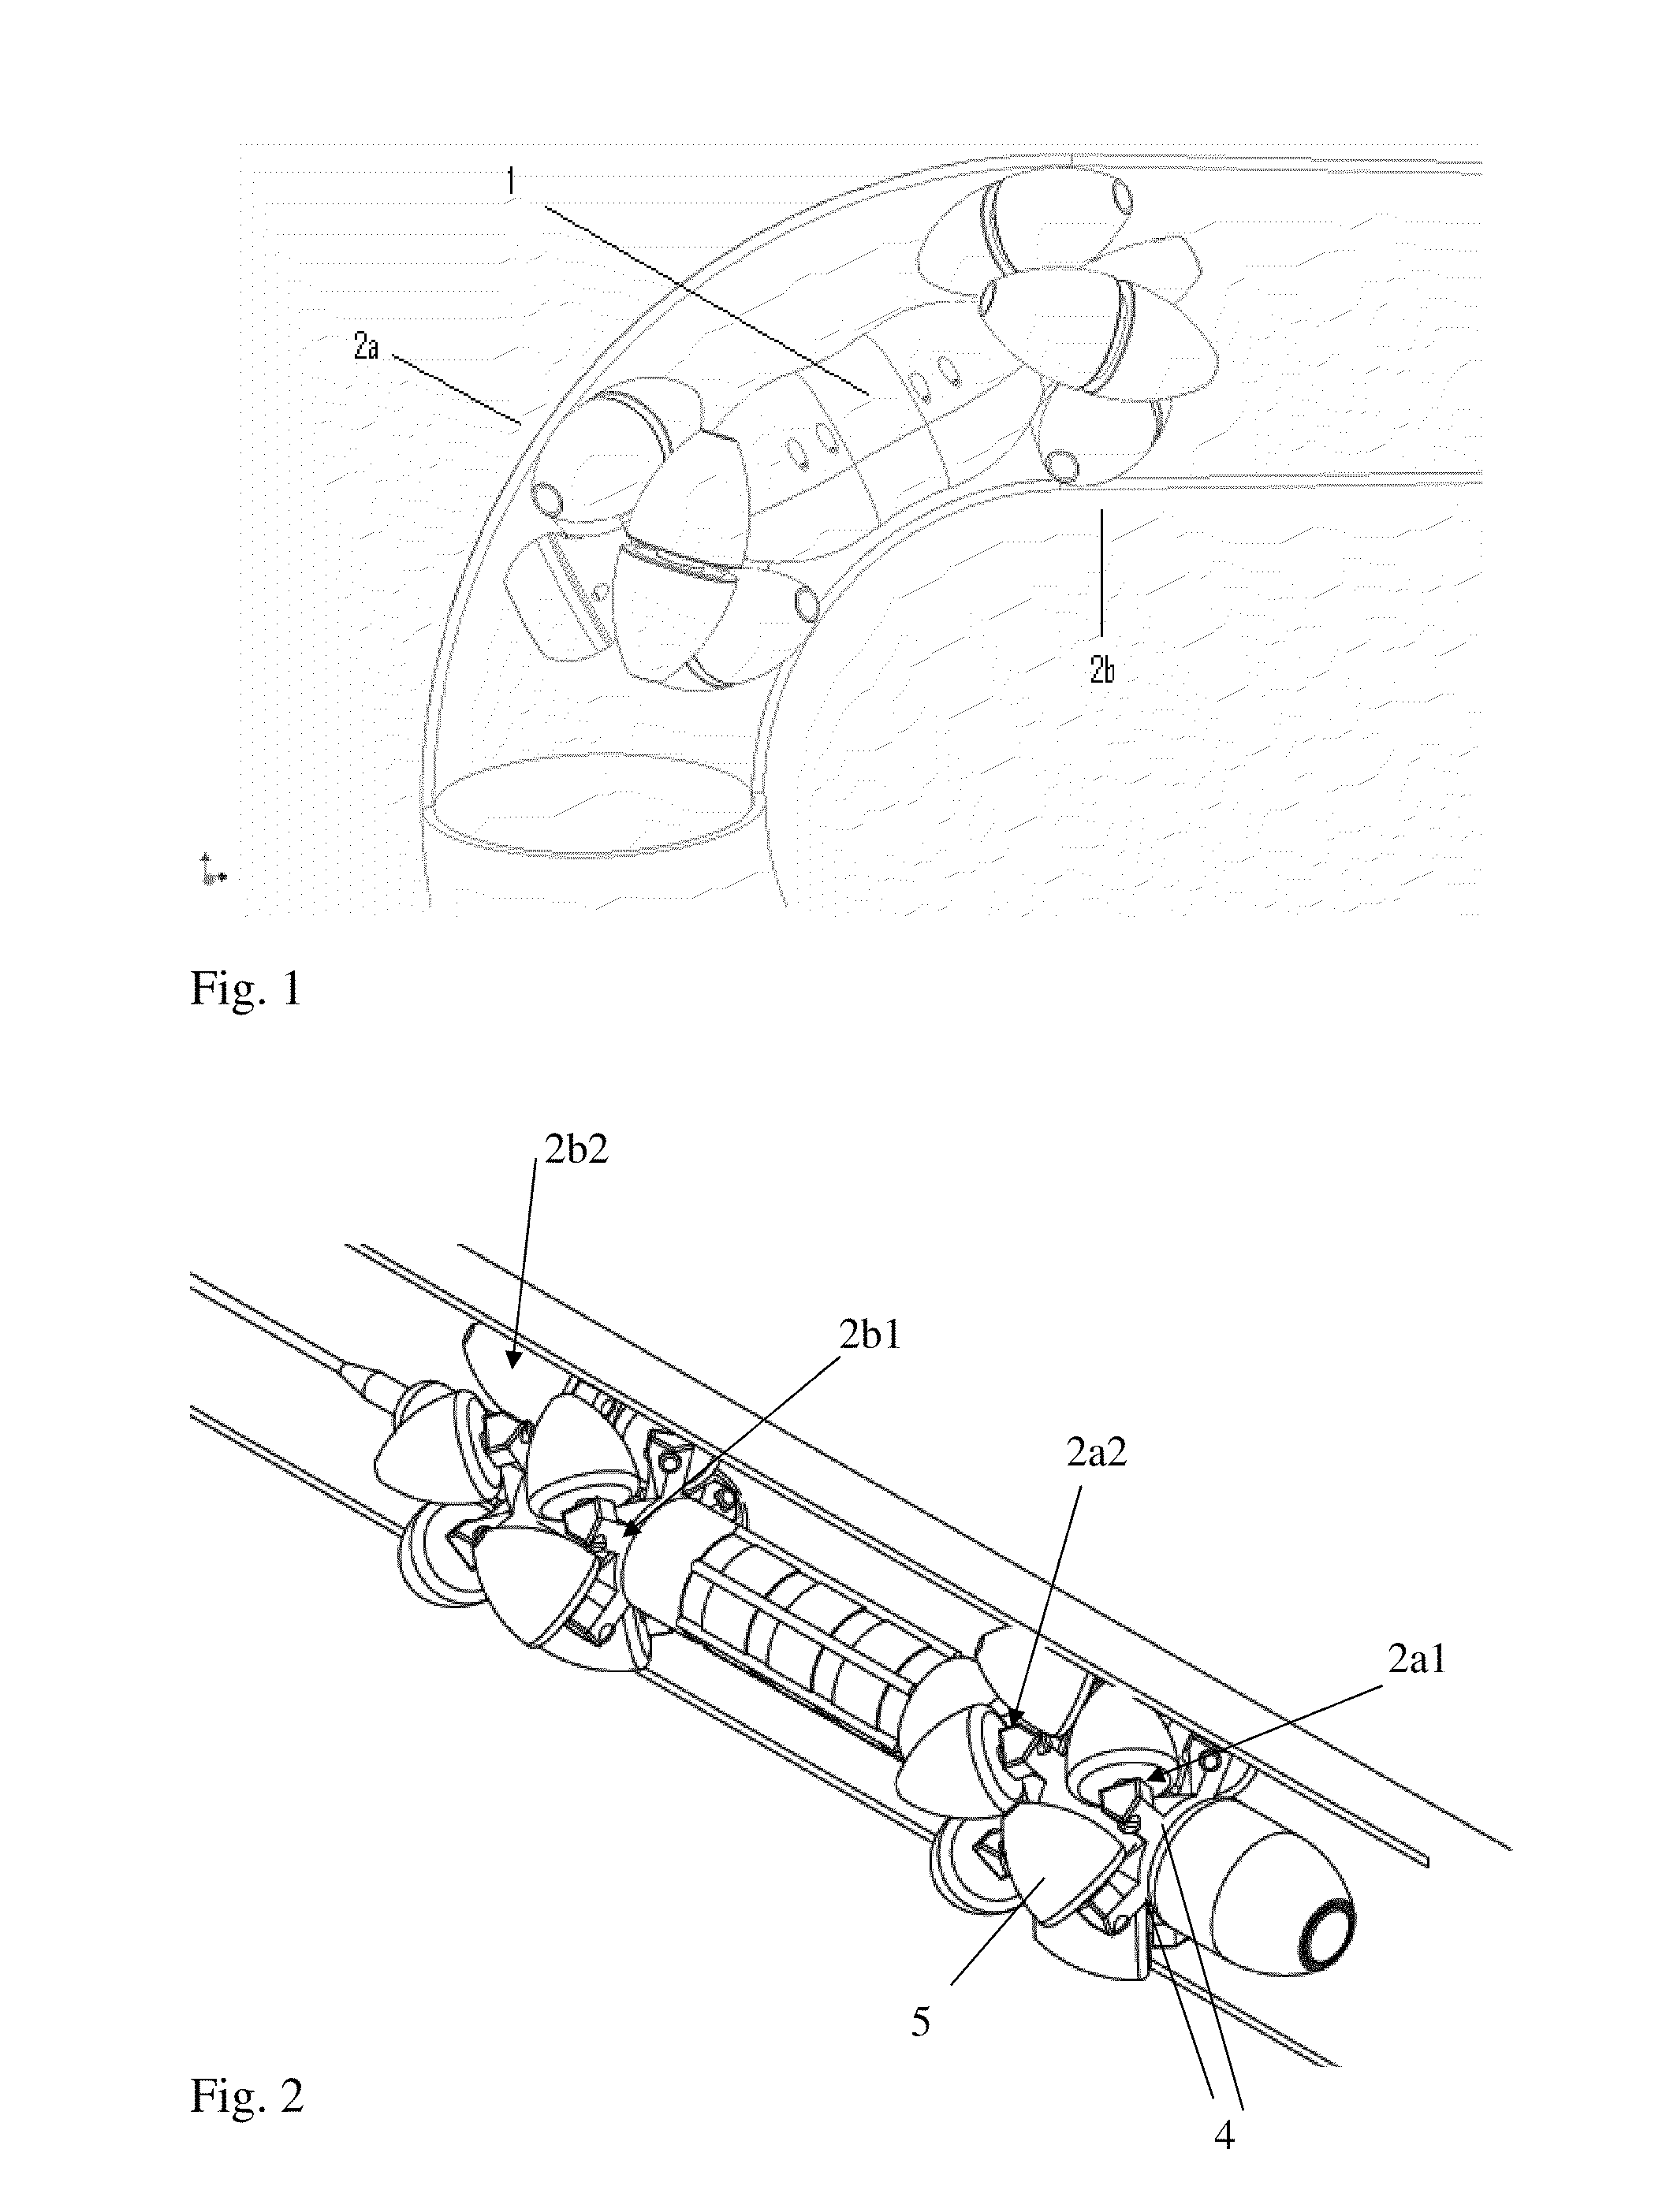 Internal conduit vehicle and method for performing operations in a pipeline